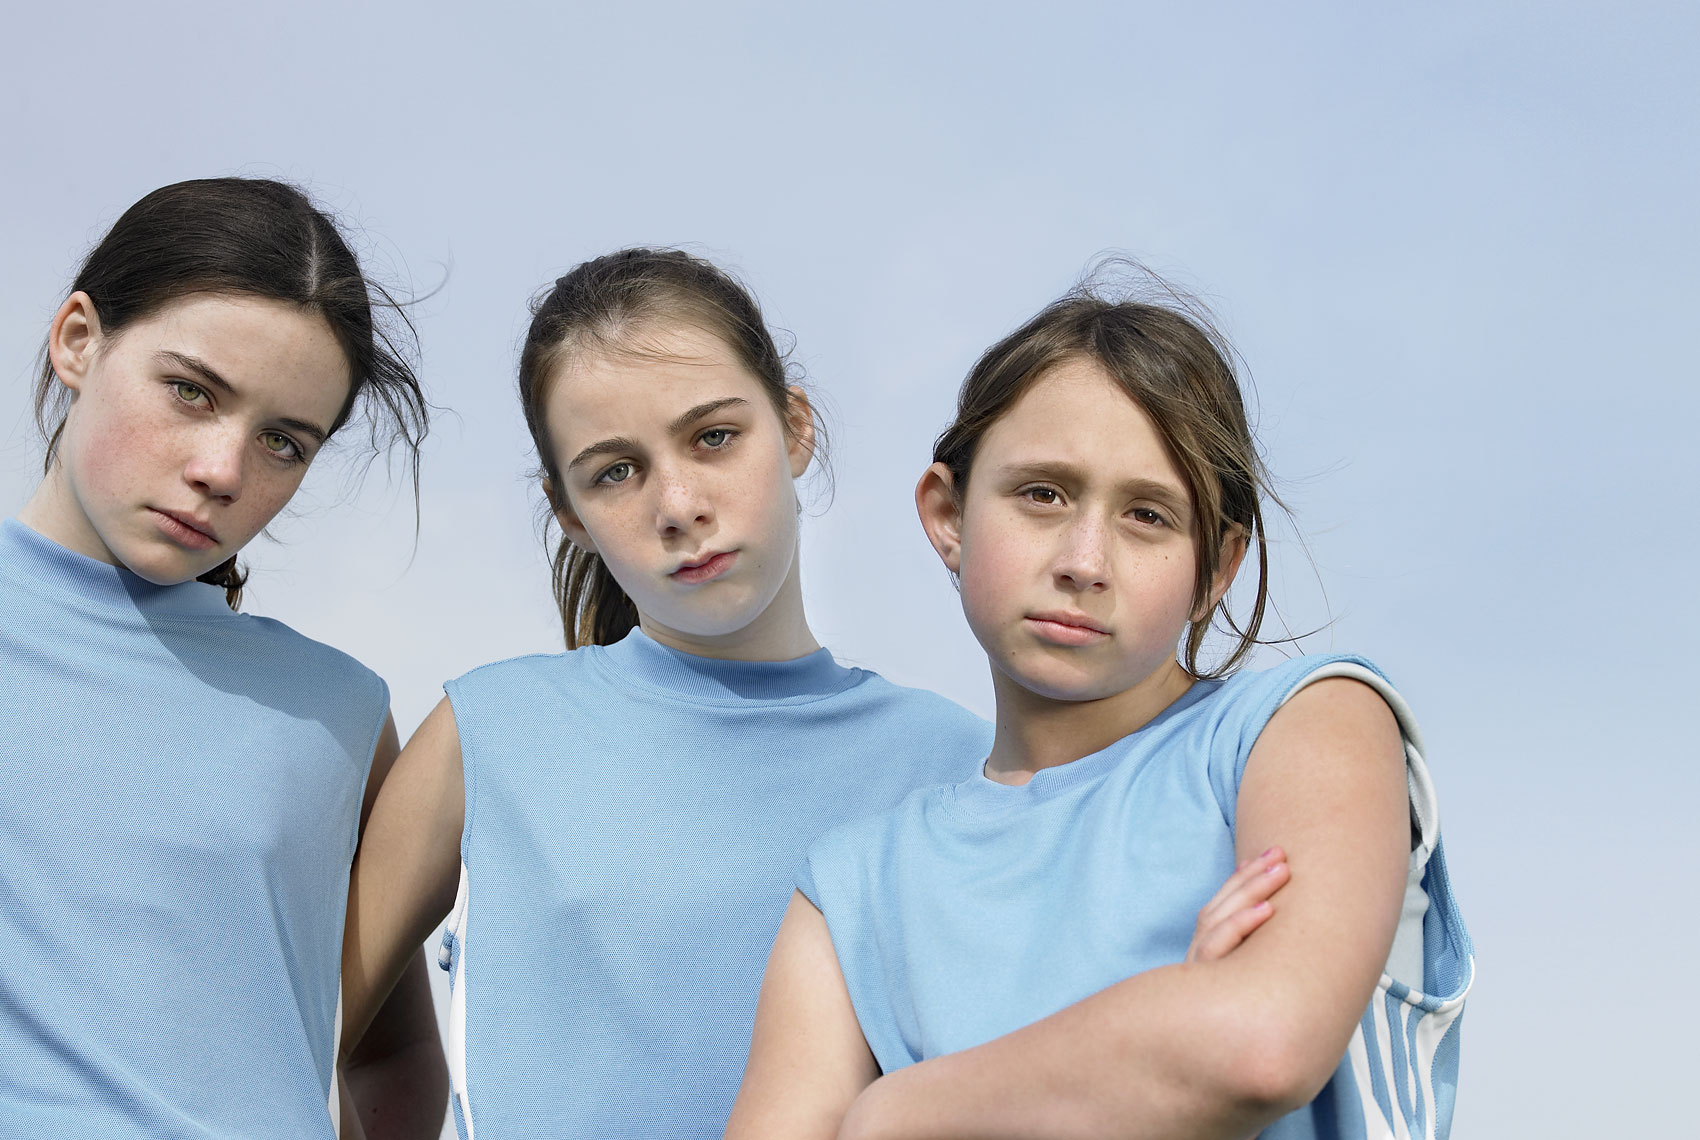 Portrait of three young girls in soccer uniforms